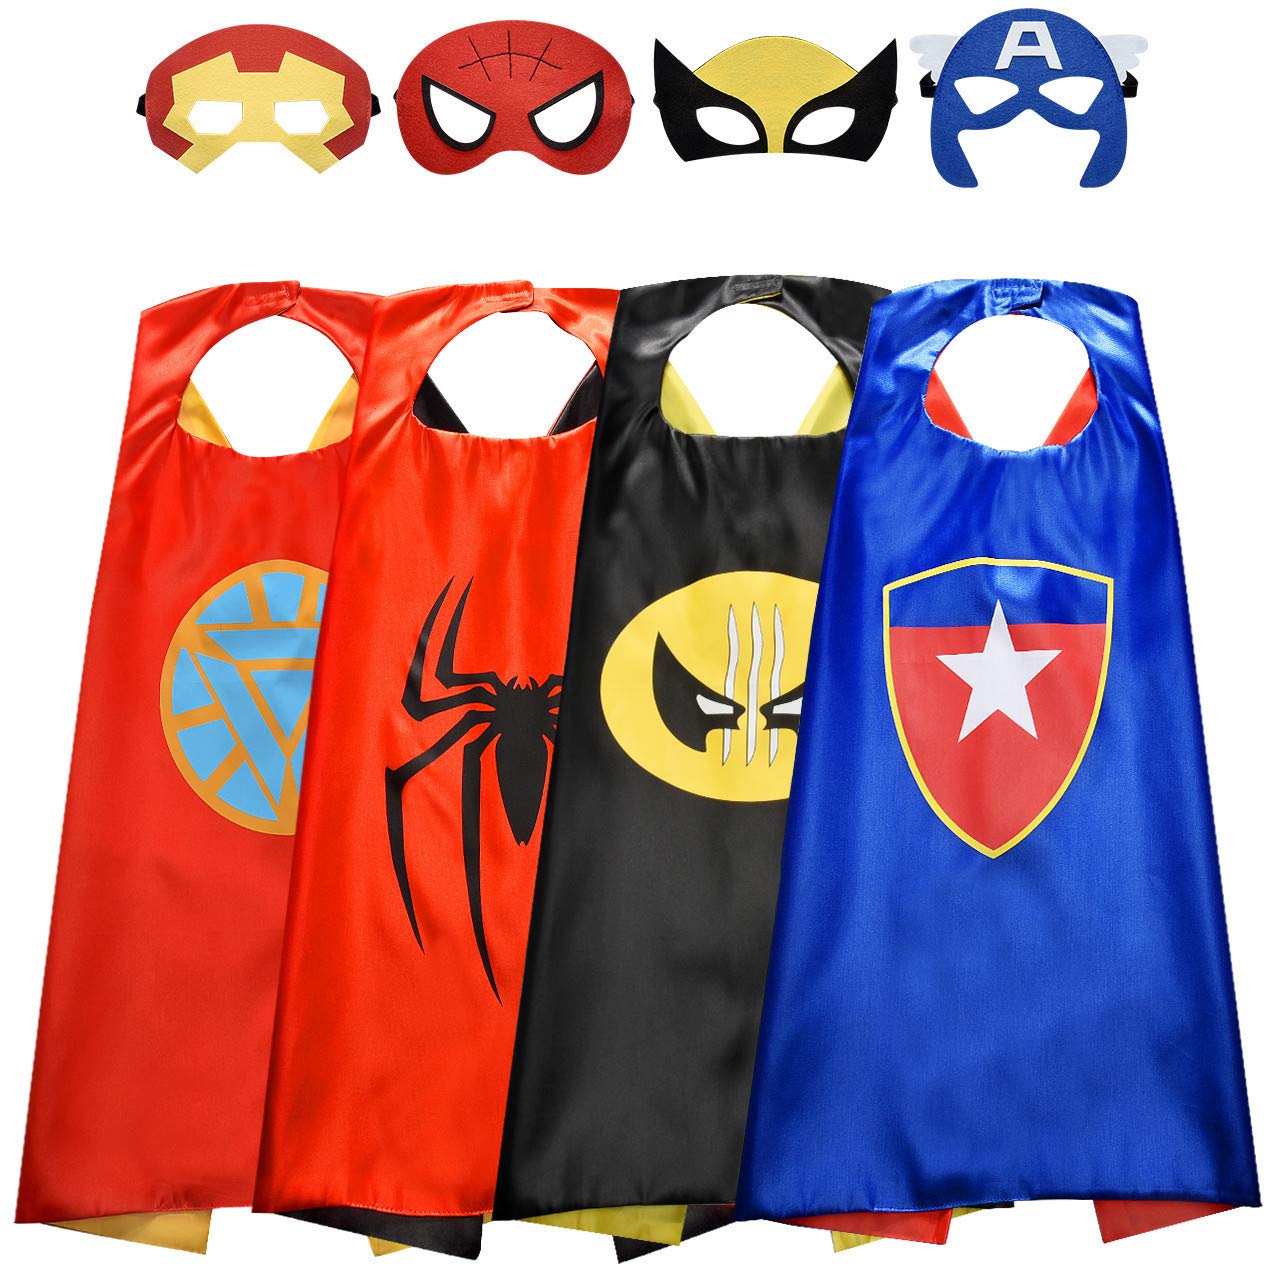 Roko Toys for 3-10 Year Old Boys, Superhero Capes for Kids 3-10 Year Old Boy Gifts Boys Cartoon Dress up Costumes Party Supplies Easter Gifts Kids Capes Superhero Capes